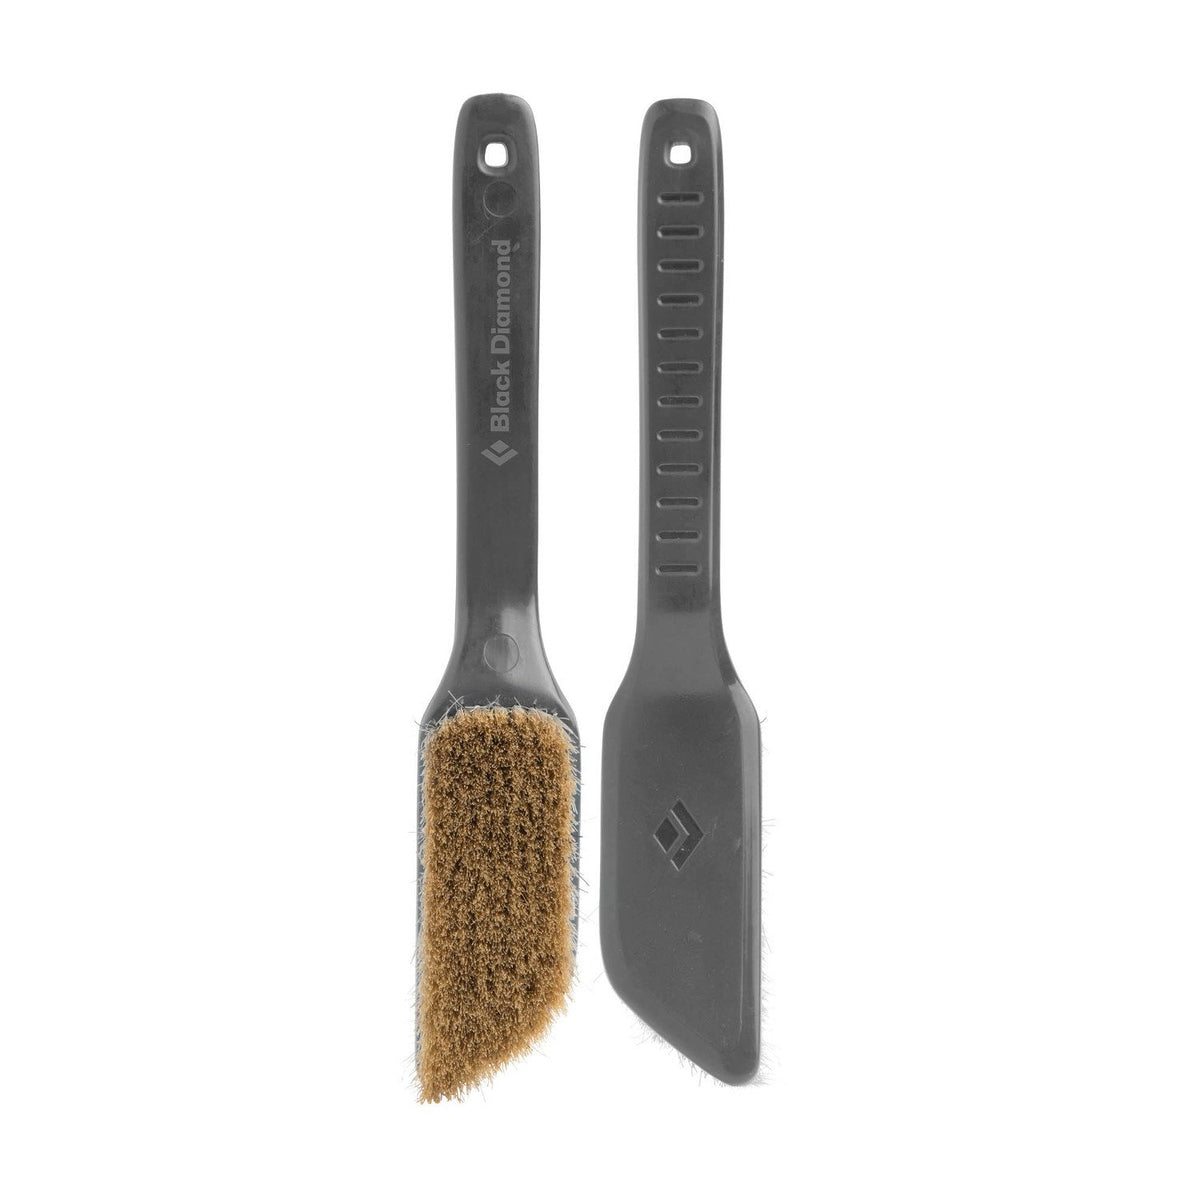 Pair of grey Black Diamond Boars Hair Brushes - Medium, 1 shown facing and 1 shown in the reverse